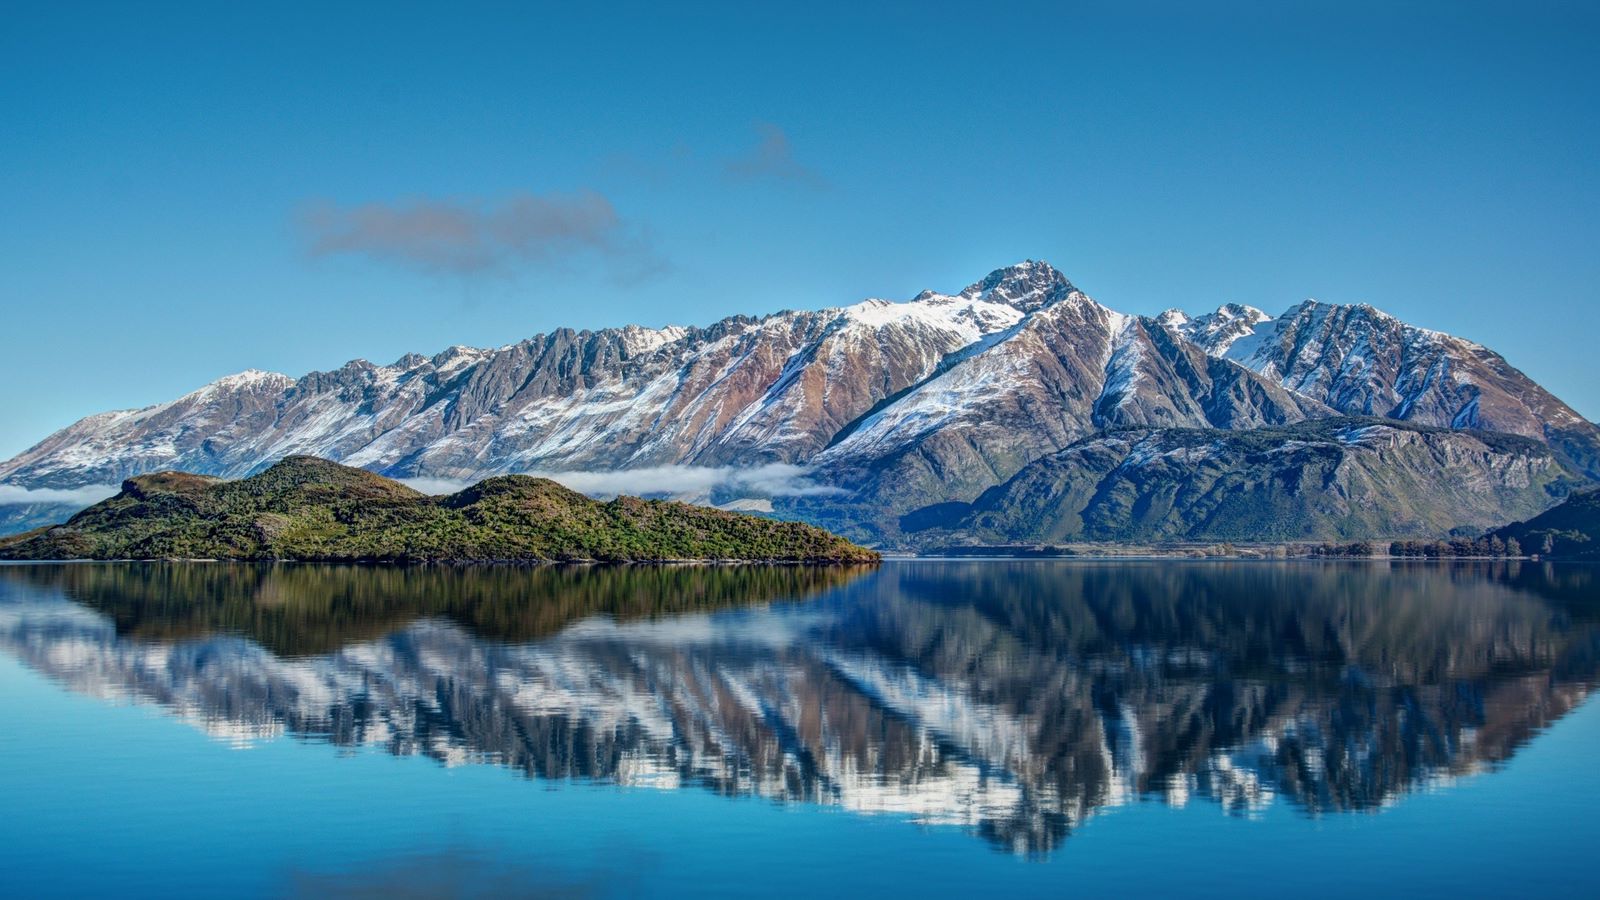 General 1600x900 New Zealand mountains landscape clear water reflection water snow nature